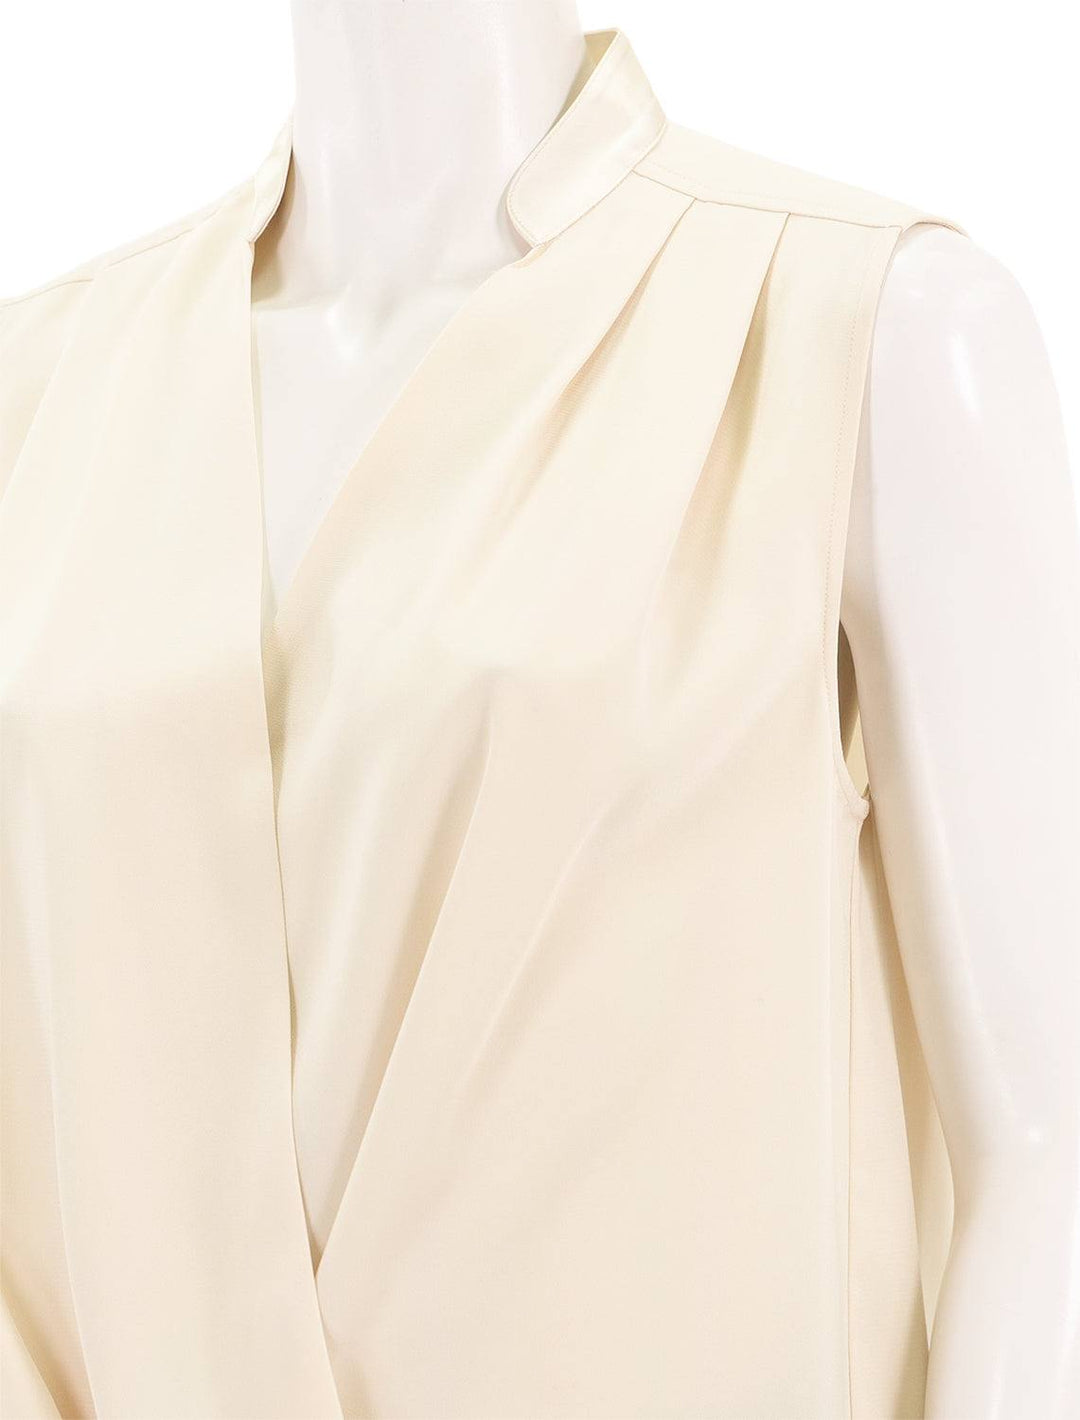 Close-up view of Rag & Bone's meredith top in ivory.